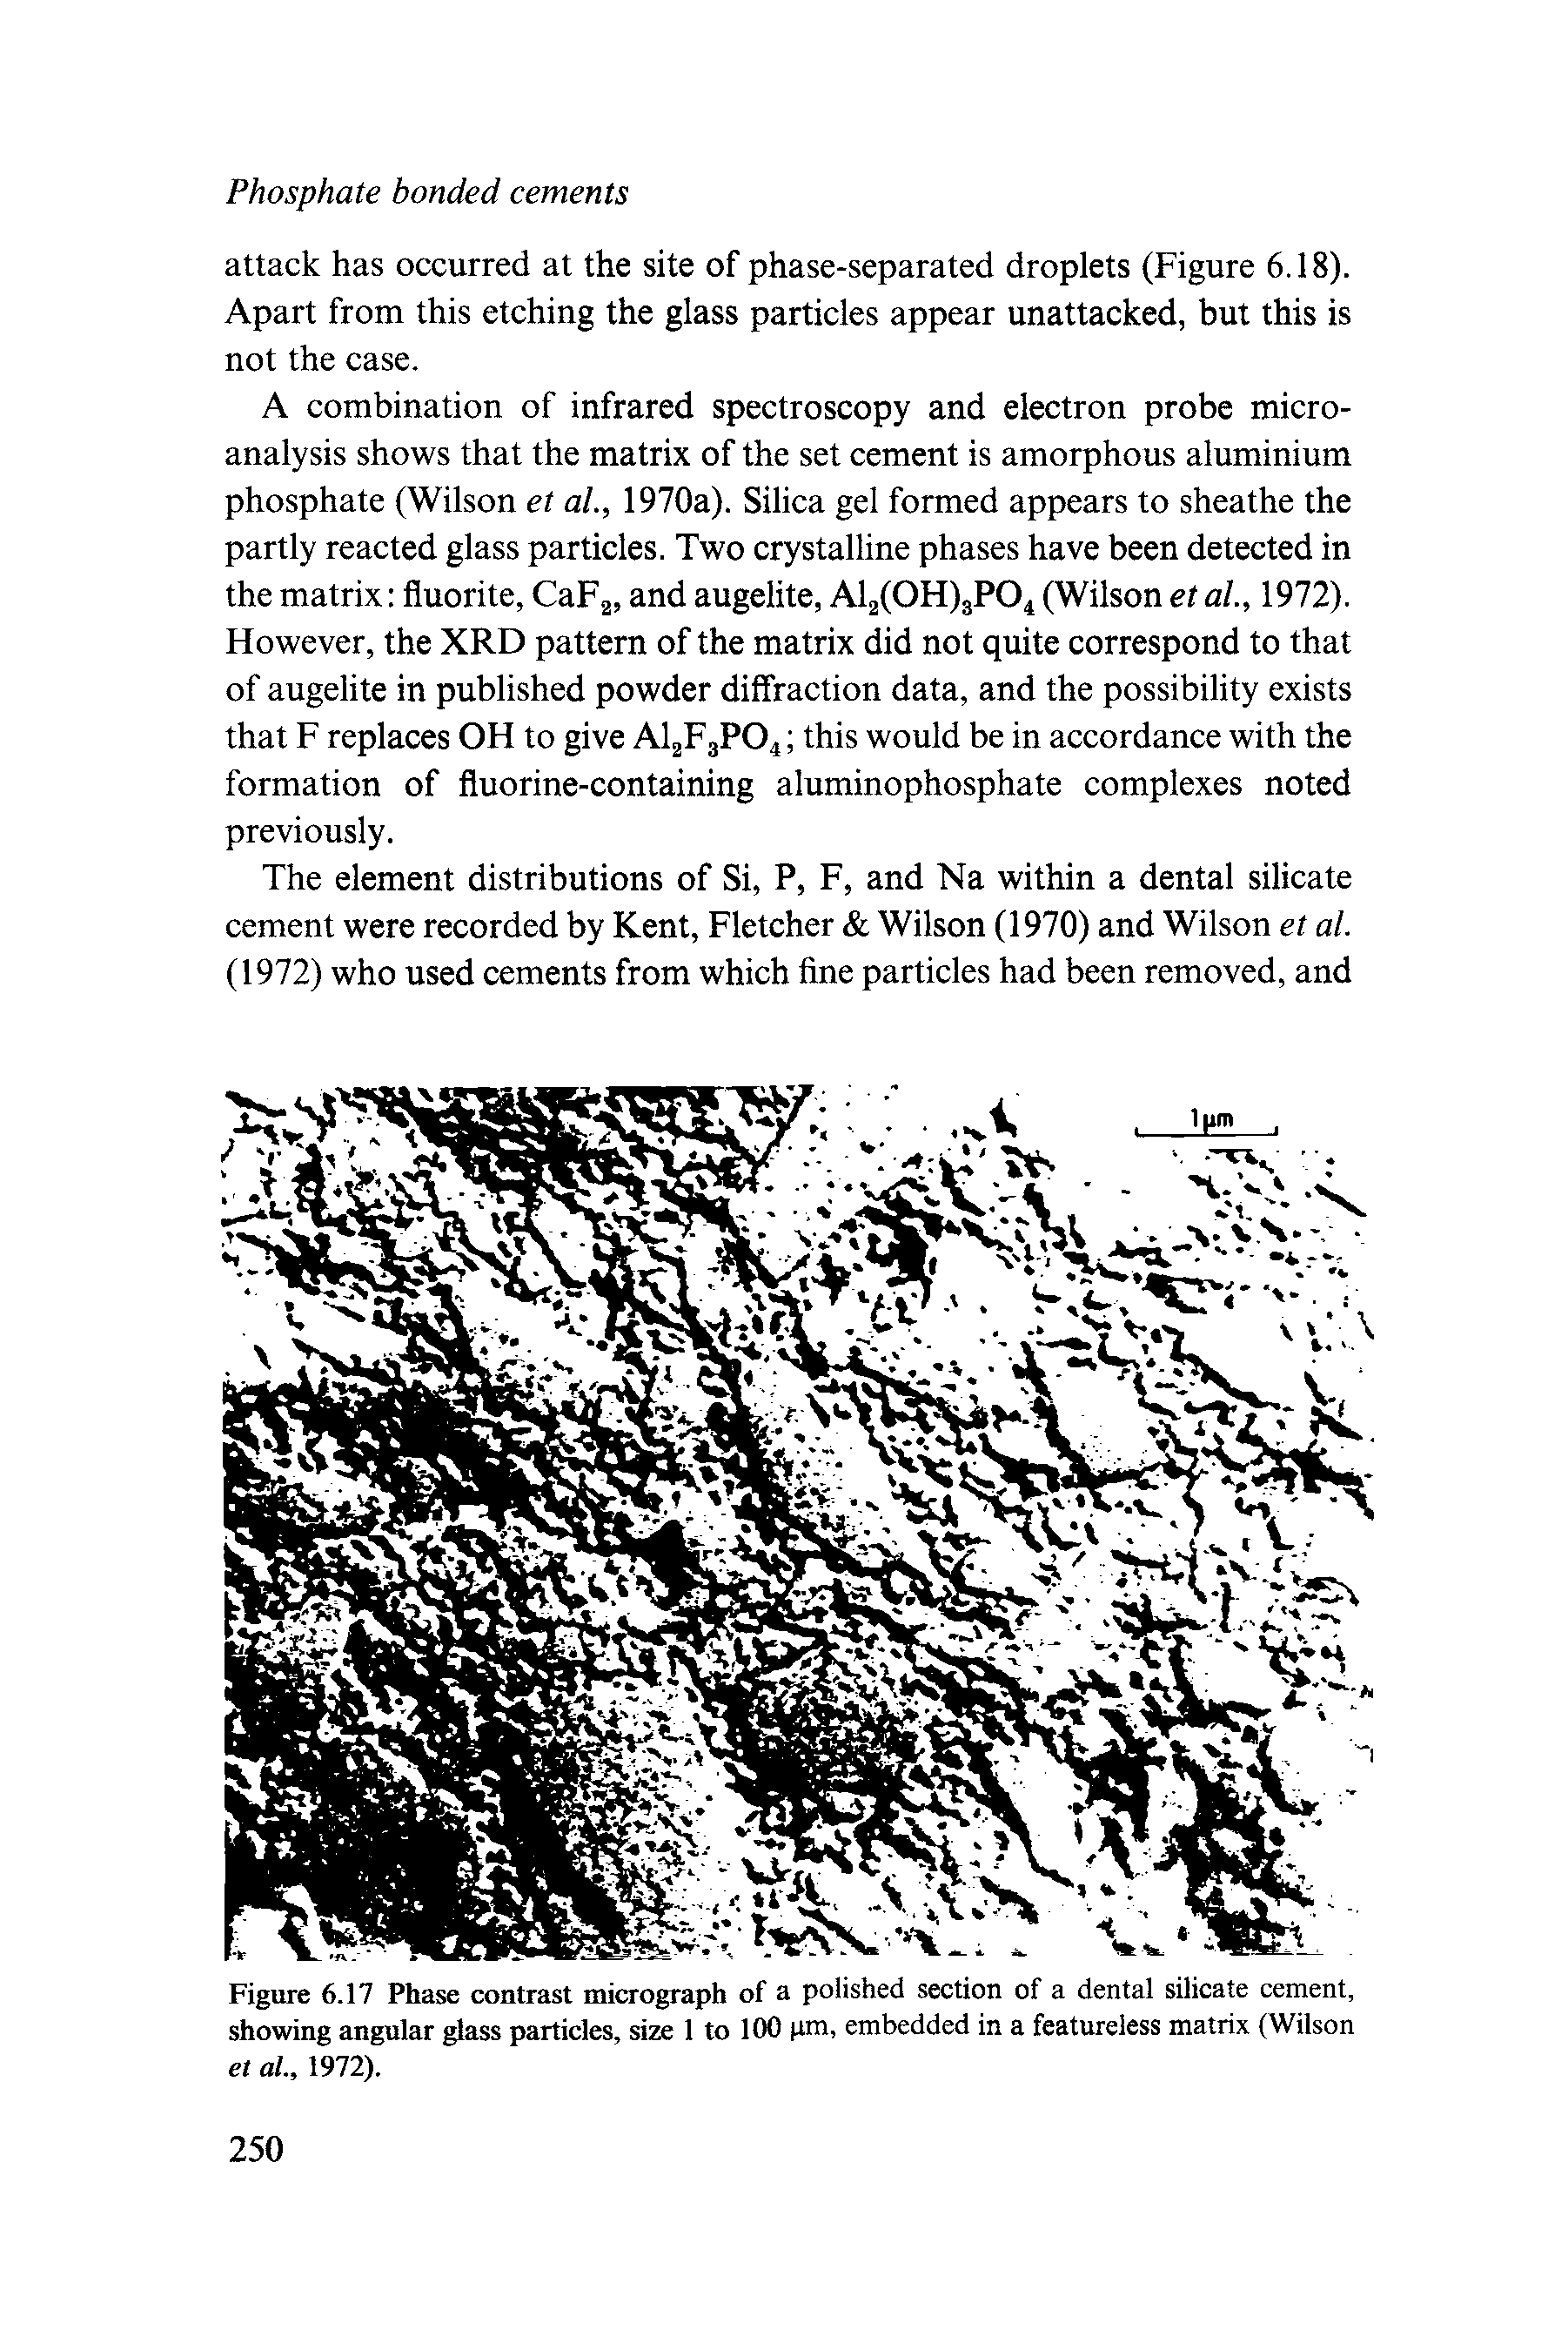 Figure 6.17 Phase contrast micrograph of a polished section of a dental silicate cement, showing angular glass particles, size 1 to 100 pm, embedded in a featureless matrix (Wilson et at., 1972).